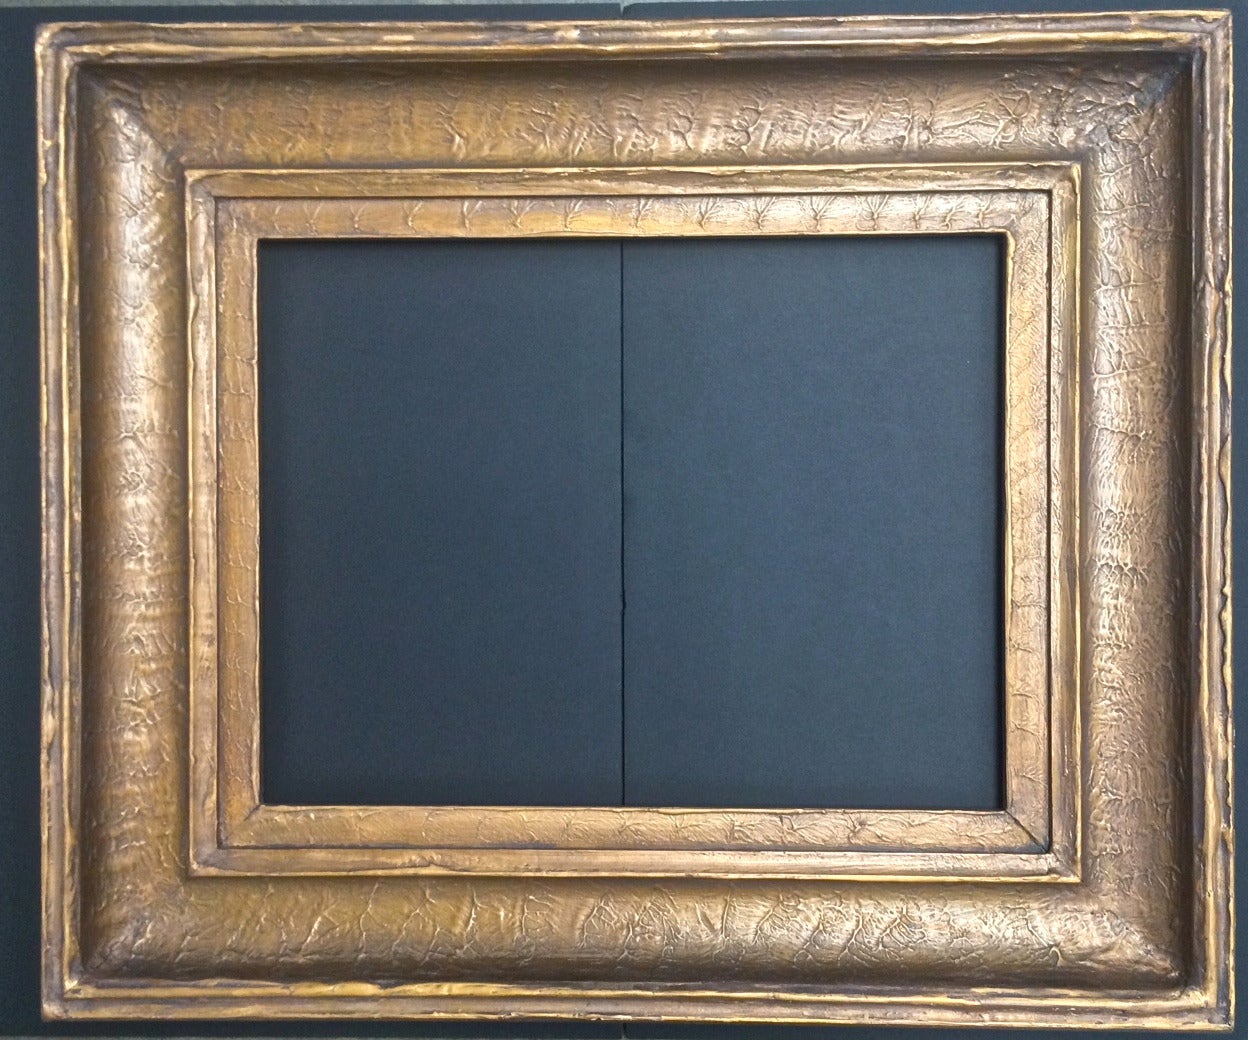 California Frame
late 19th/early 20th century
carved, gilded gessoed redwood
Exterior: 39 x 33 inches
Interior: 23 x 13 inches
excellent condition